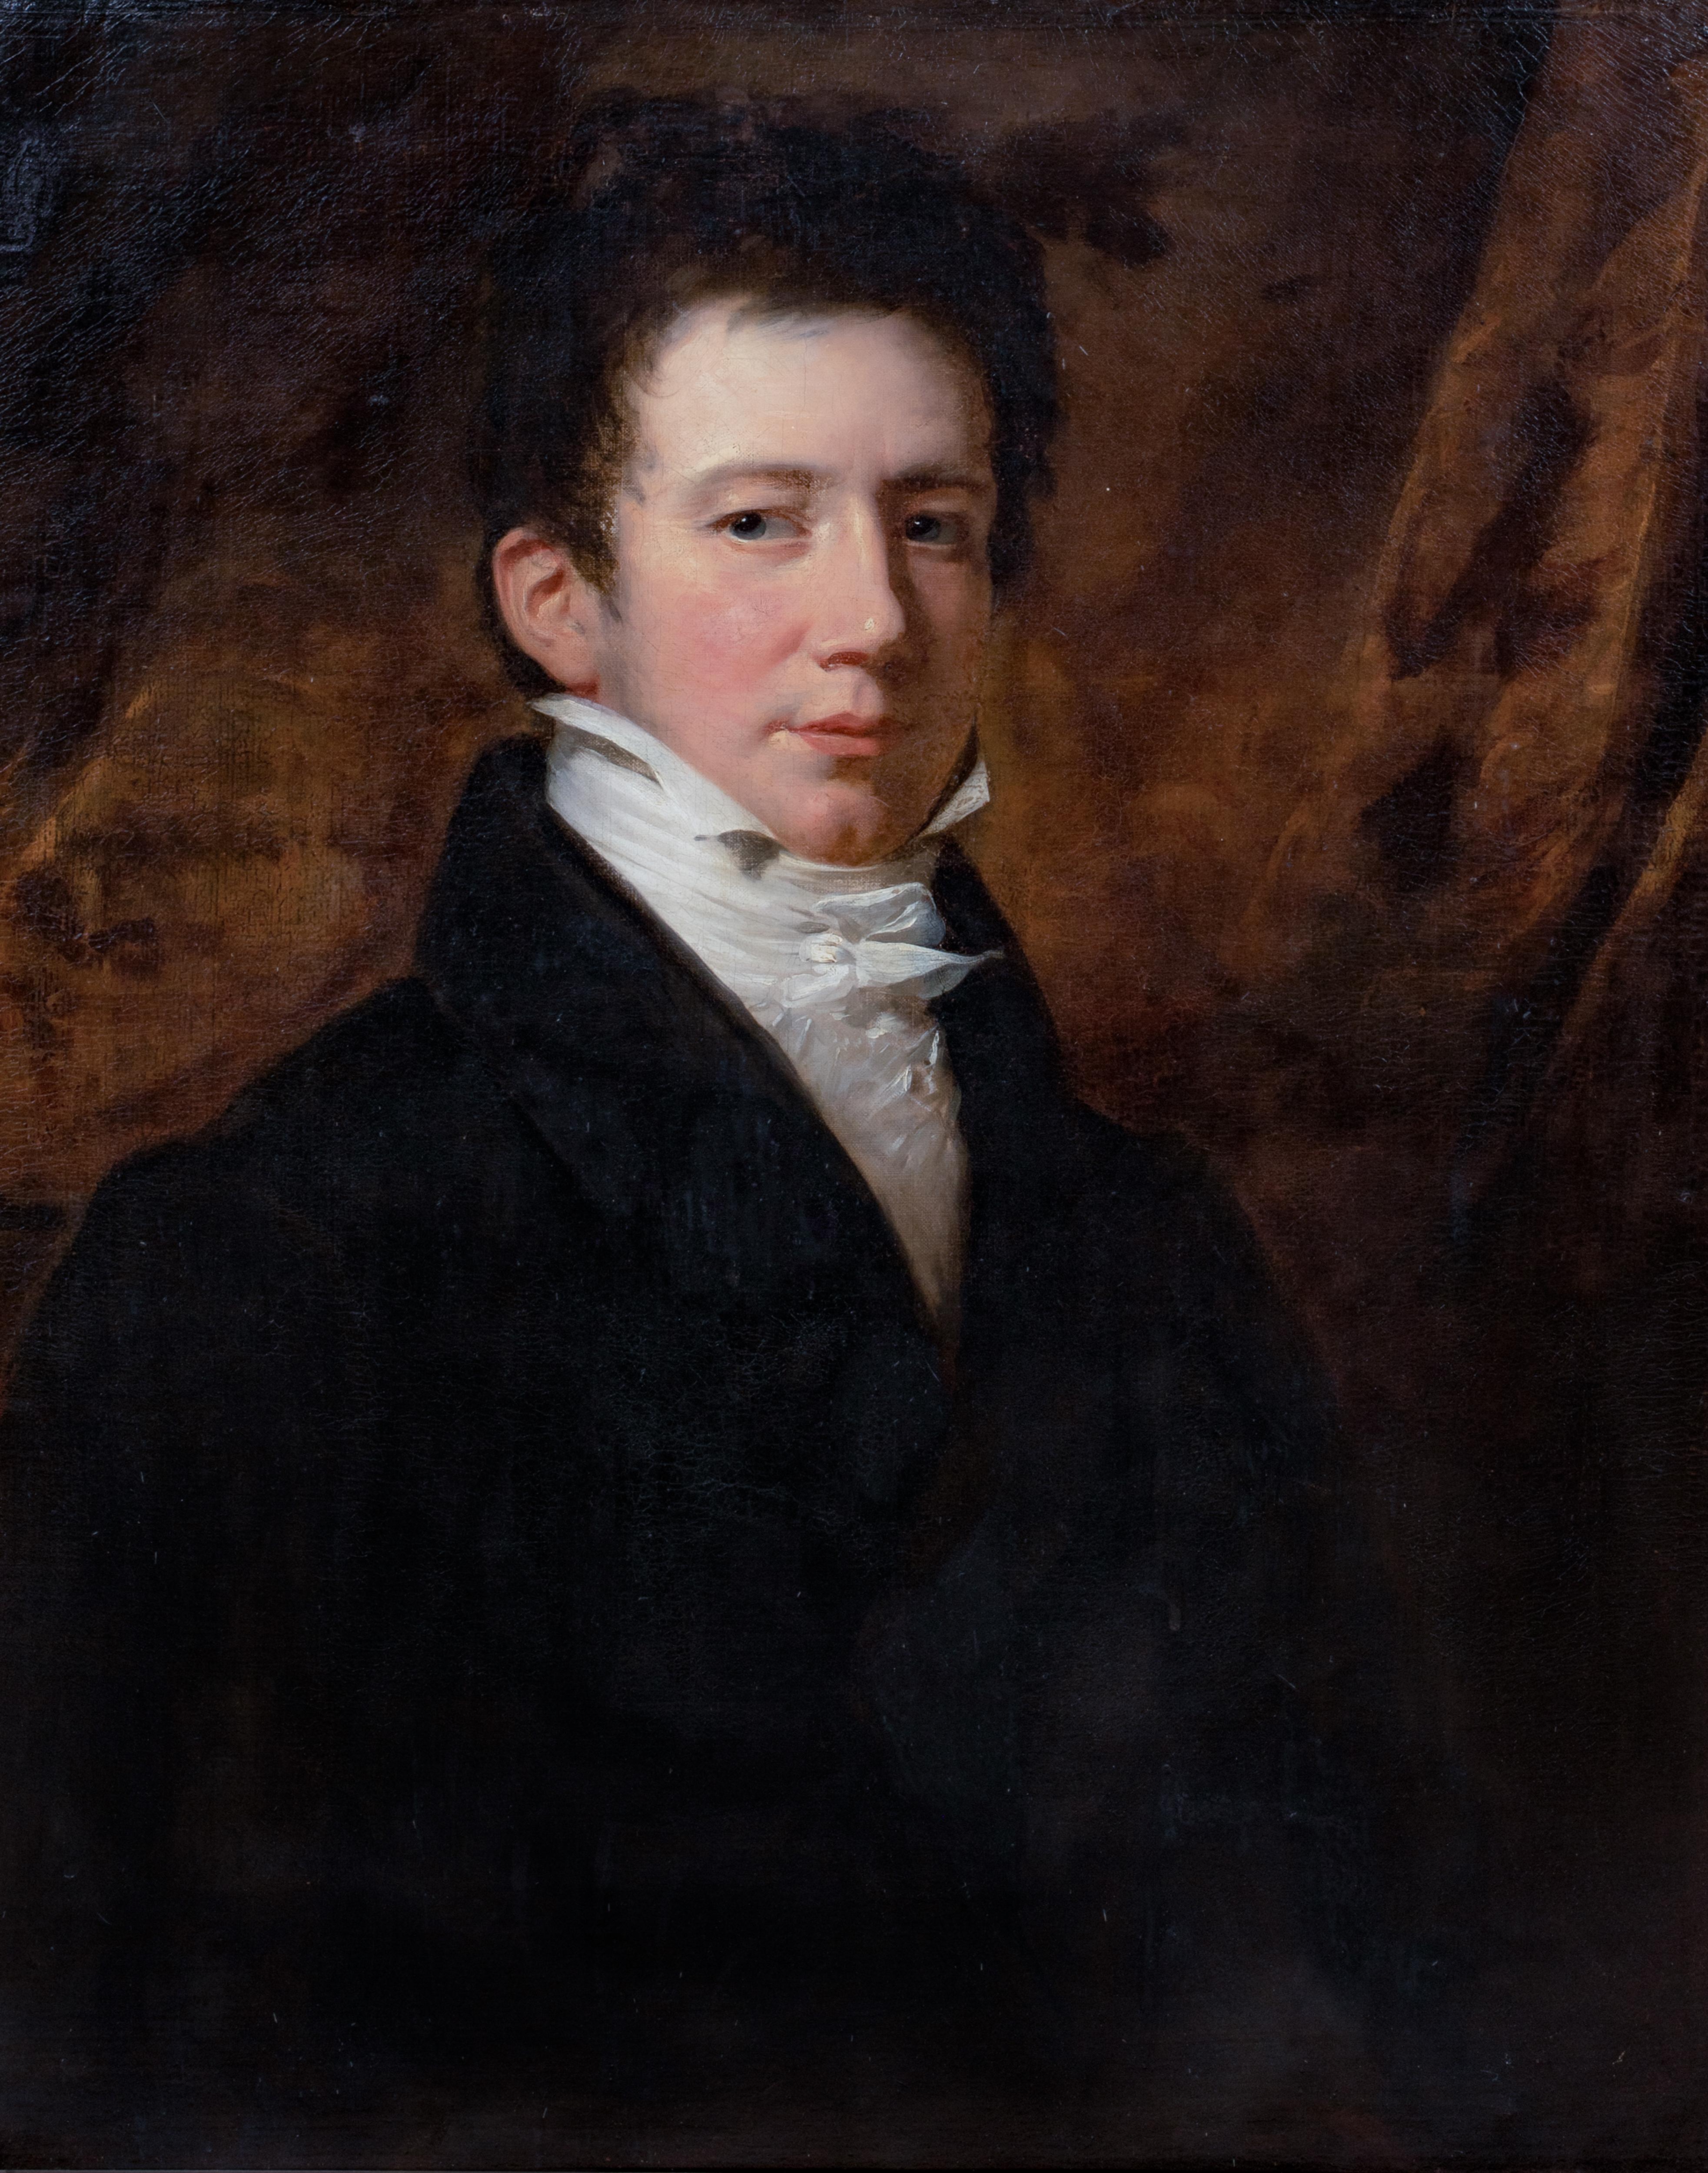 Portrait Of John Conant Of Worcester, Massachusetts (1773-1856), circa 1810

circle of Gilbert STUART (1755-1828)

Large early 19th century portrait of John Conant of Worcester, Massachusetts, oil on canvas. Excellent quality and condition circa